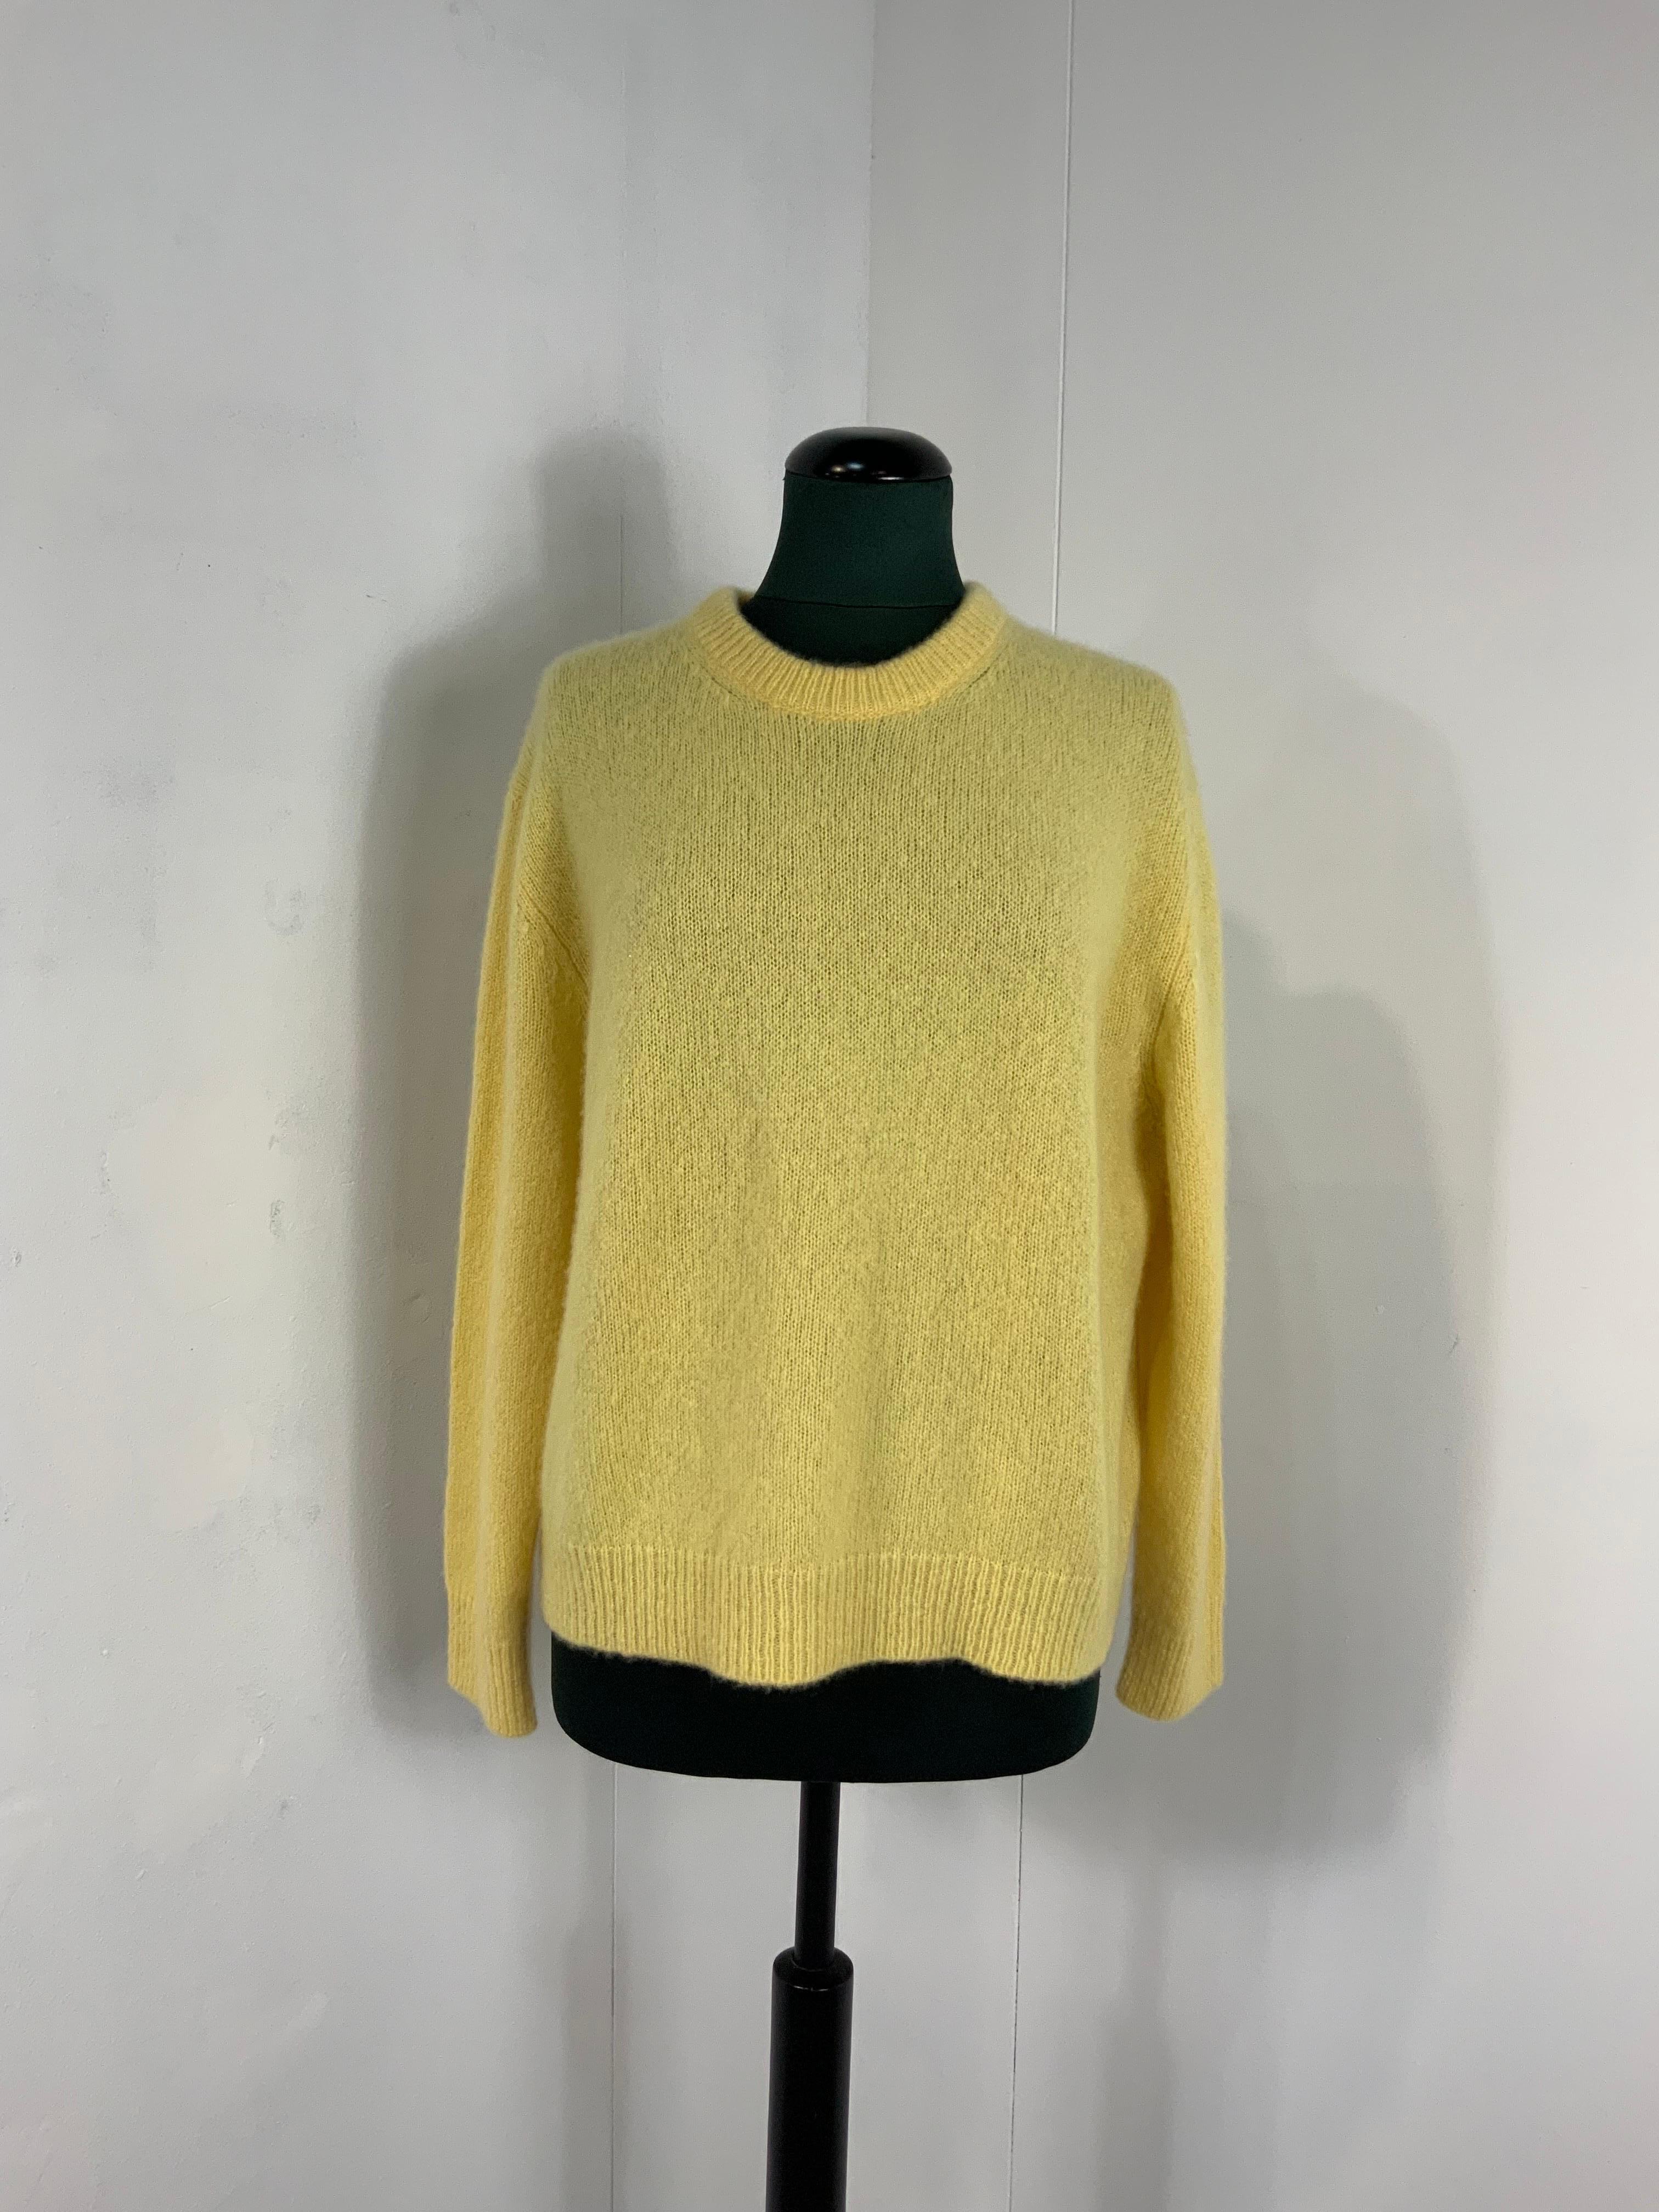 CELINE YELLOW KNITWEAR.
Yellow sweater. Missing composition and size label. The material is very soft and we think it’s cashmere.
Fits multiple sizes. Ideal for an international M.
Shoulders 47 cm
Bust 59 cm
Length 65 cm
Sleeve 59 cm
Excellent